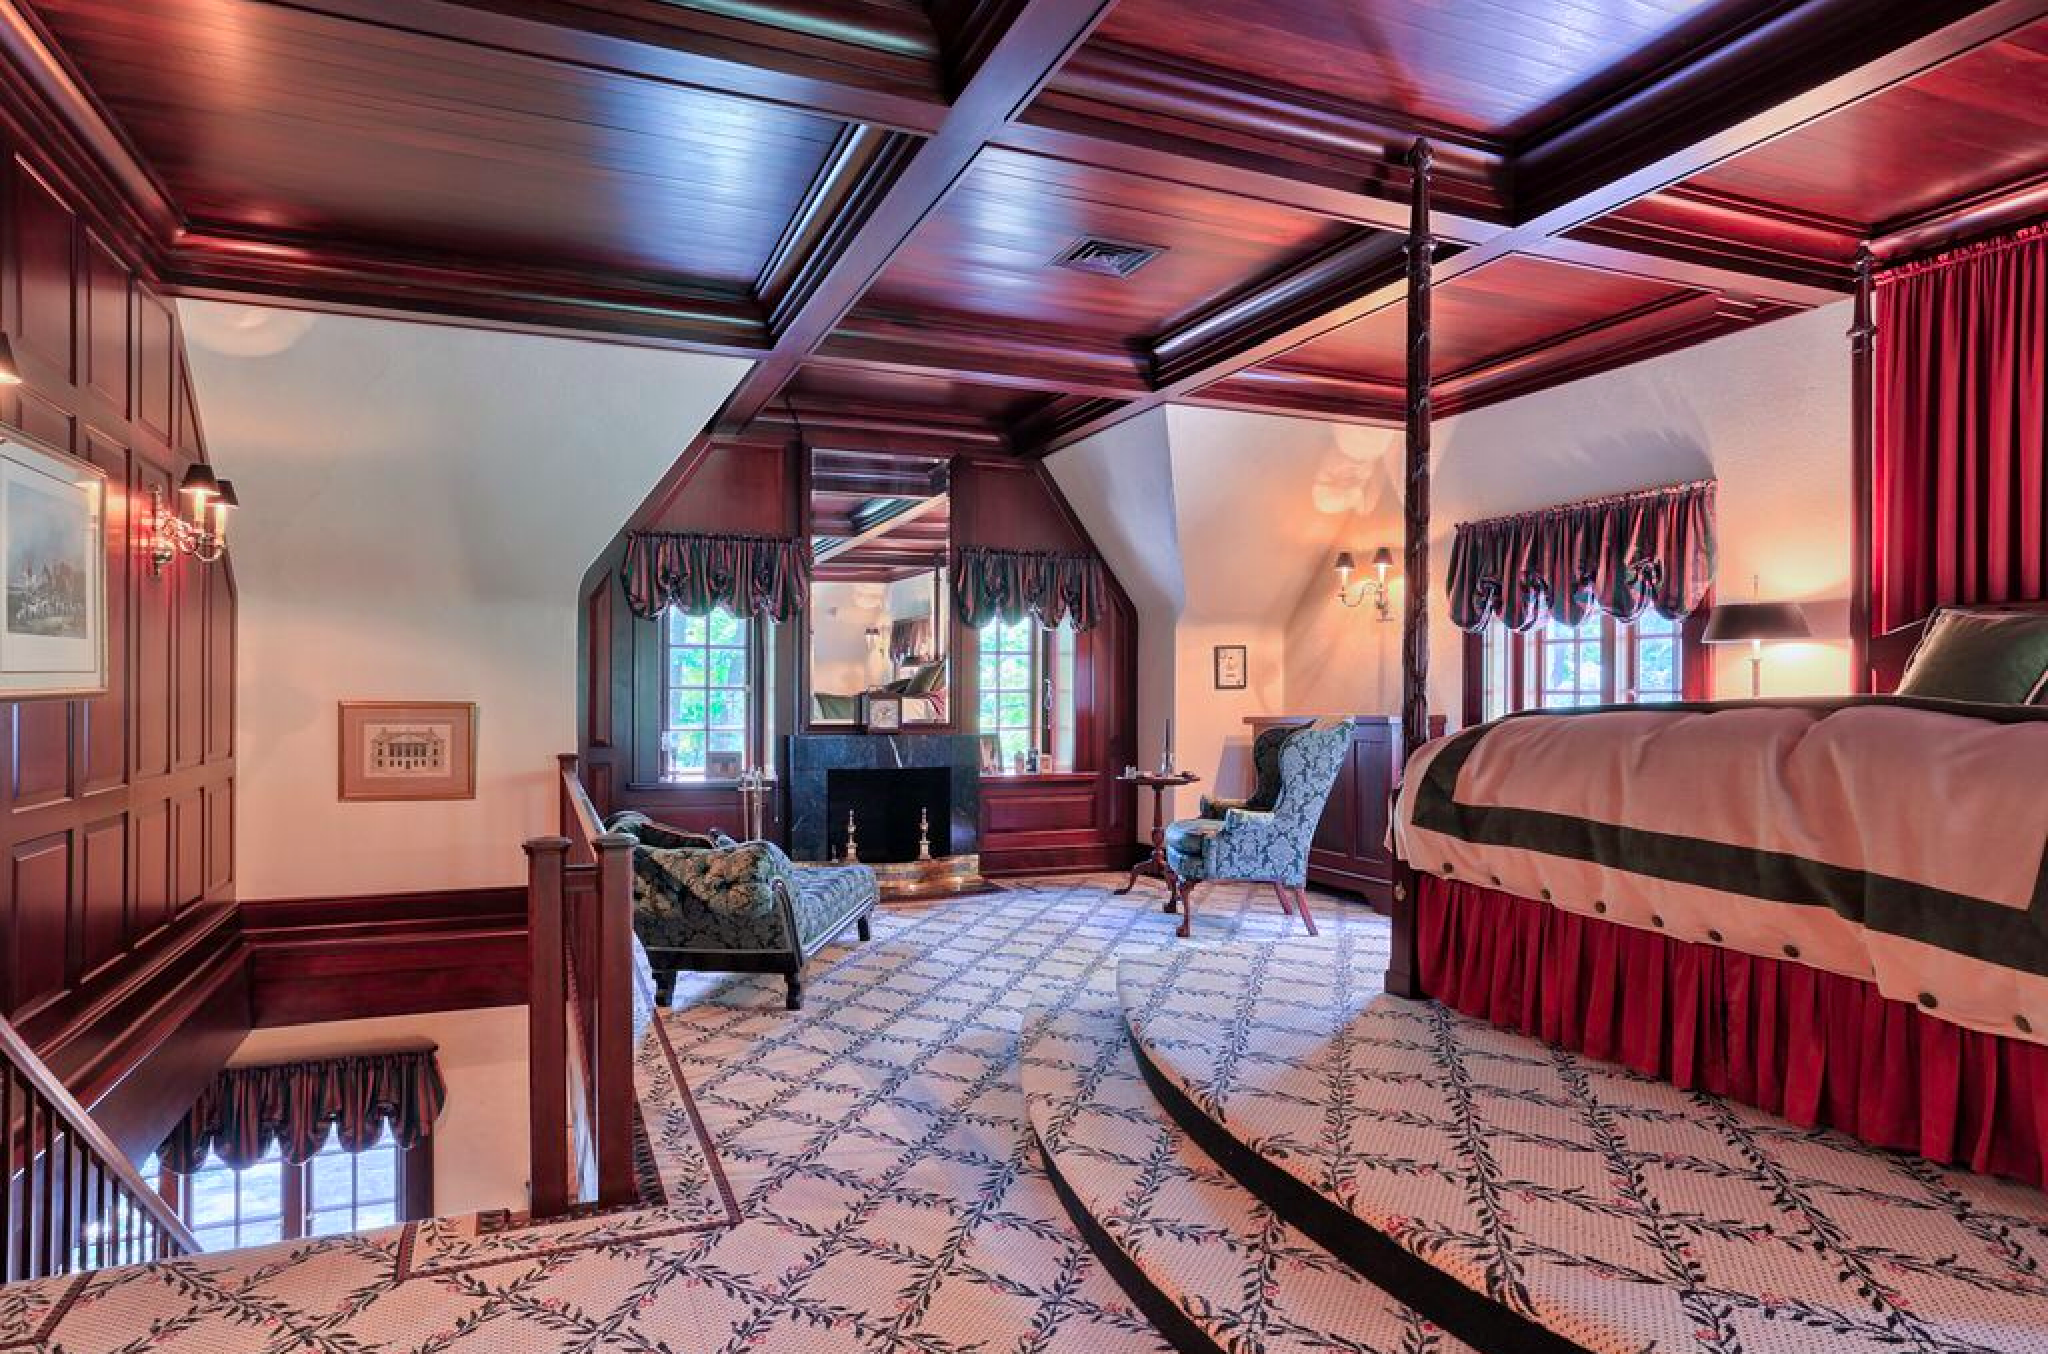 Cherry coffered ceiling, paneling, and fireplace surround in master suite